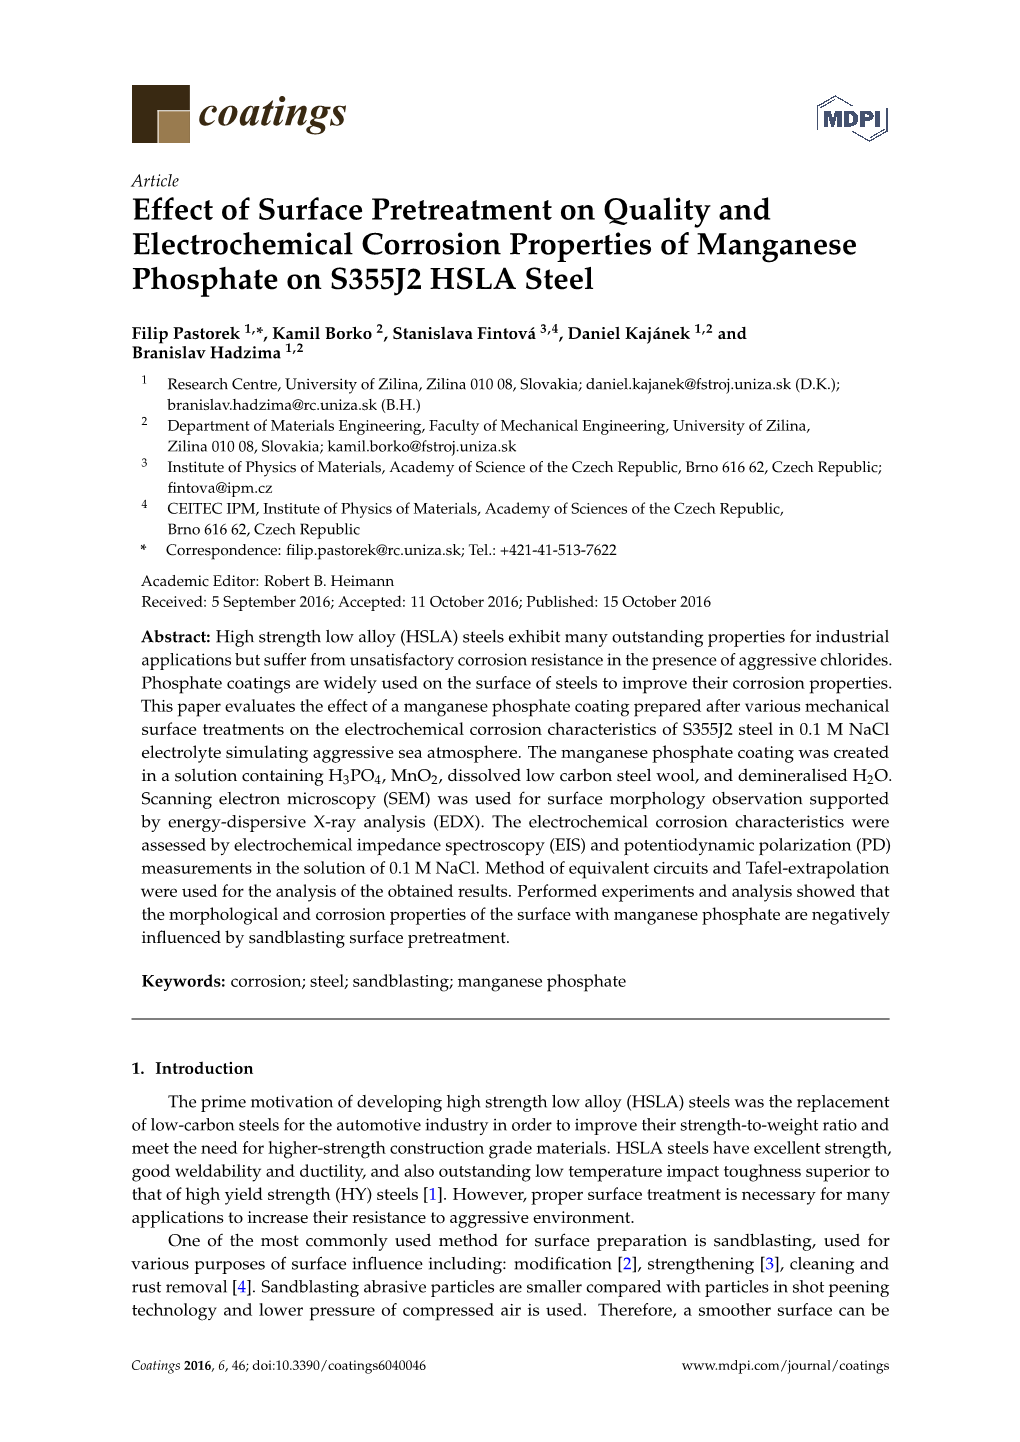 Effect of Surface Pretreatment on Quality and Electrochemical Corrosion Properties of Manganese Phosphate on S355J2 HSLA Steel